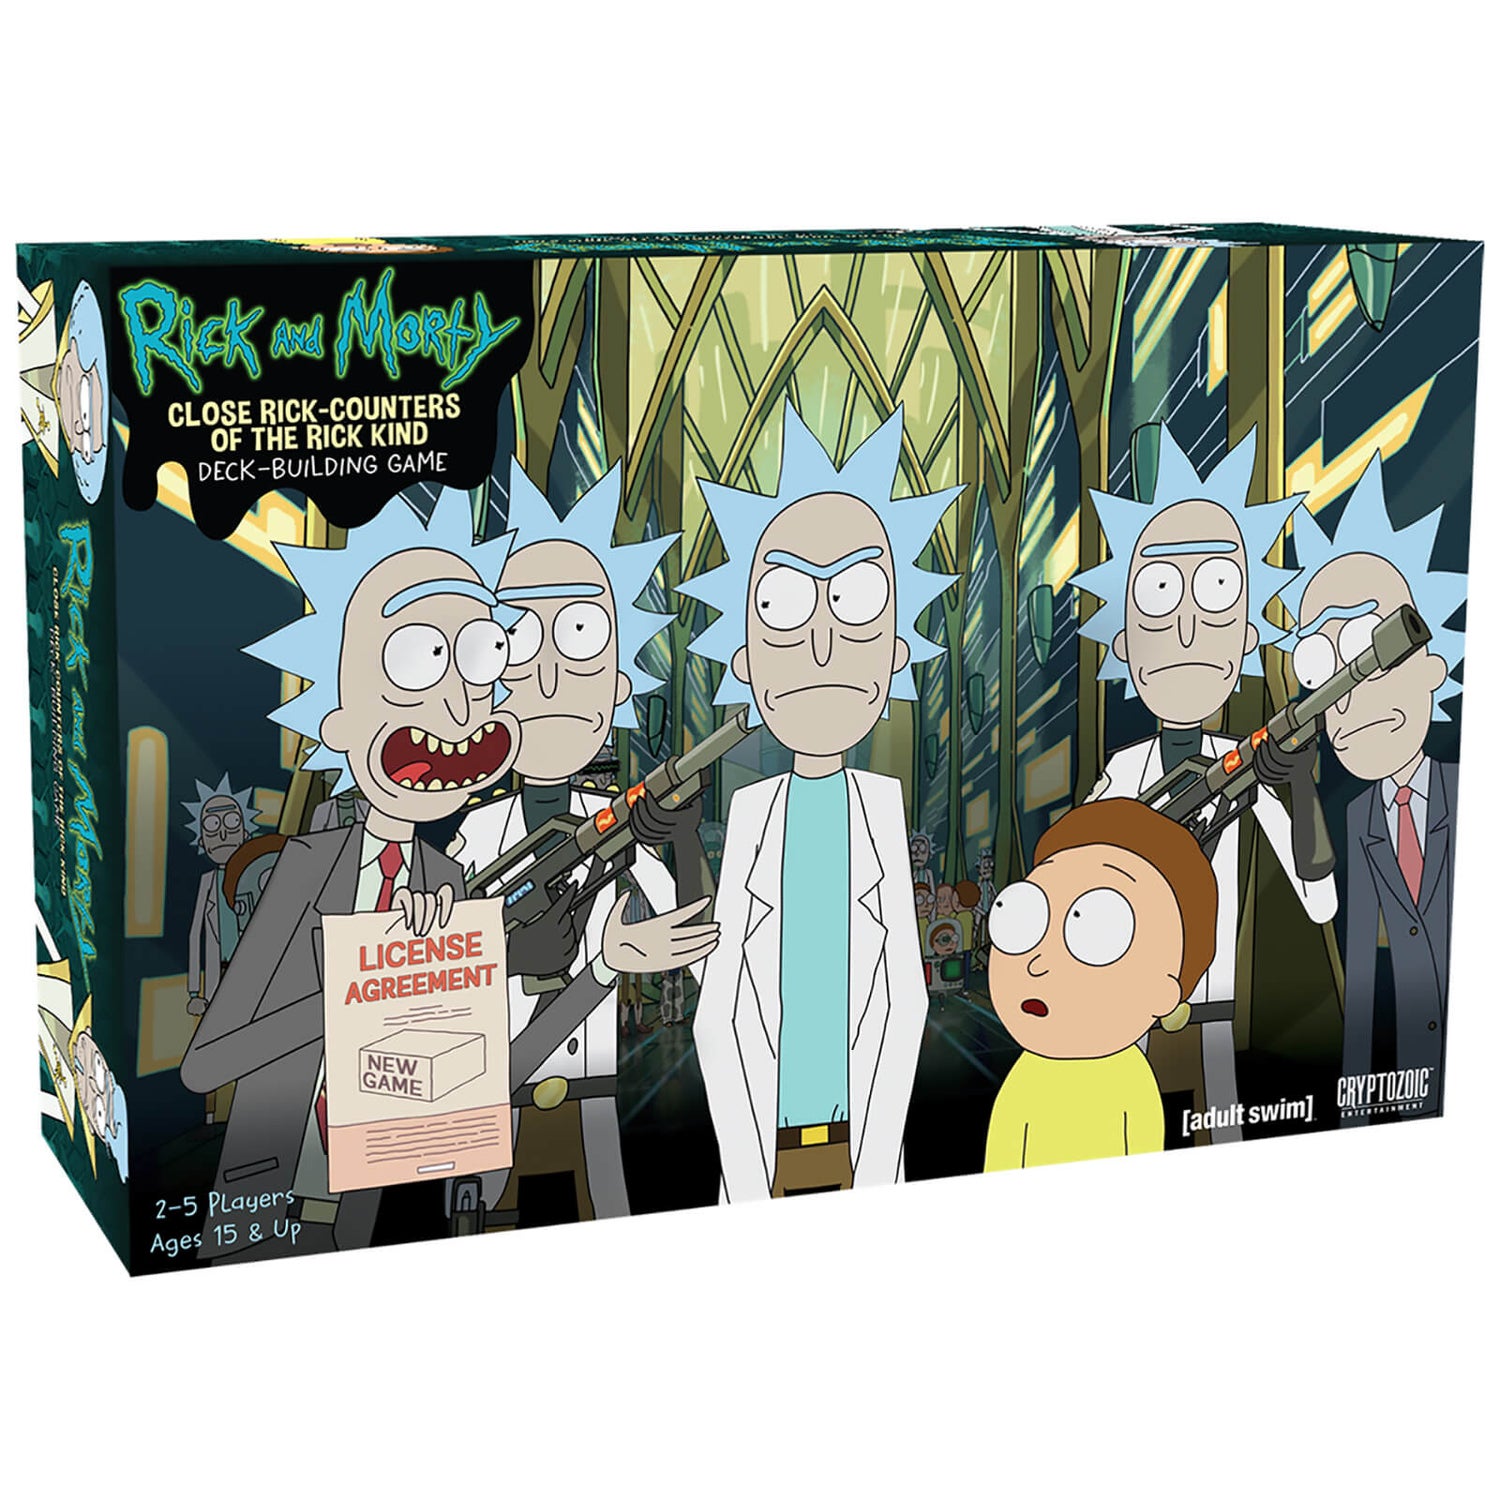 Close Rick Counters of the Rick Kind Deck Building: Rick and Morty